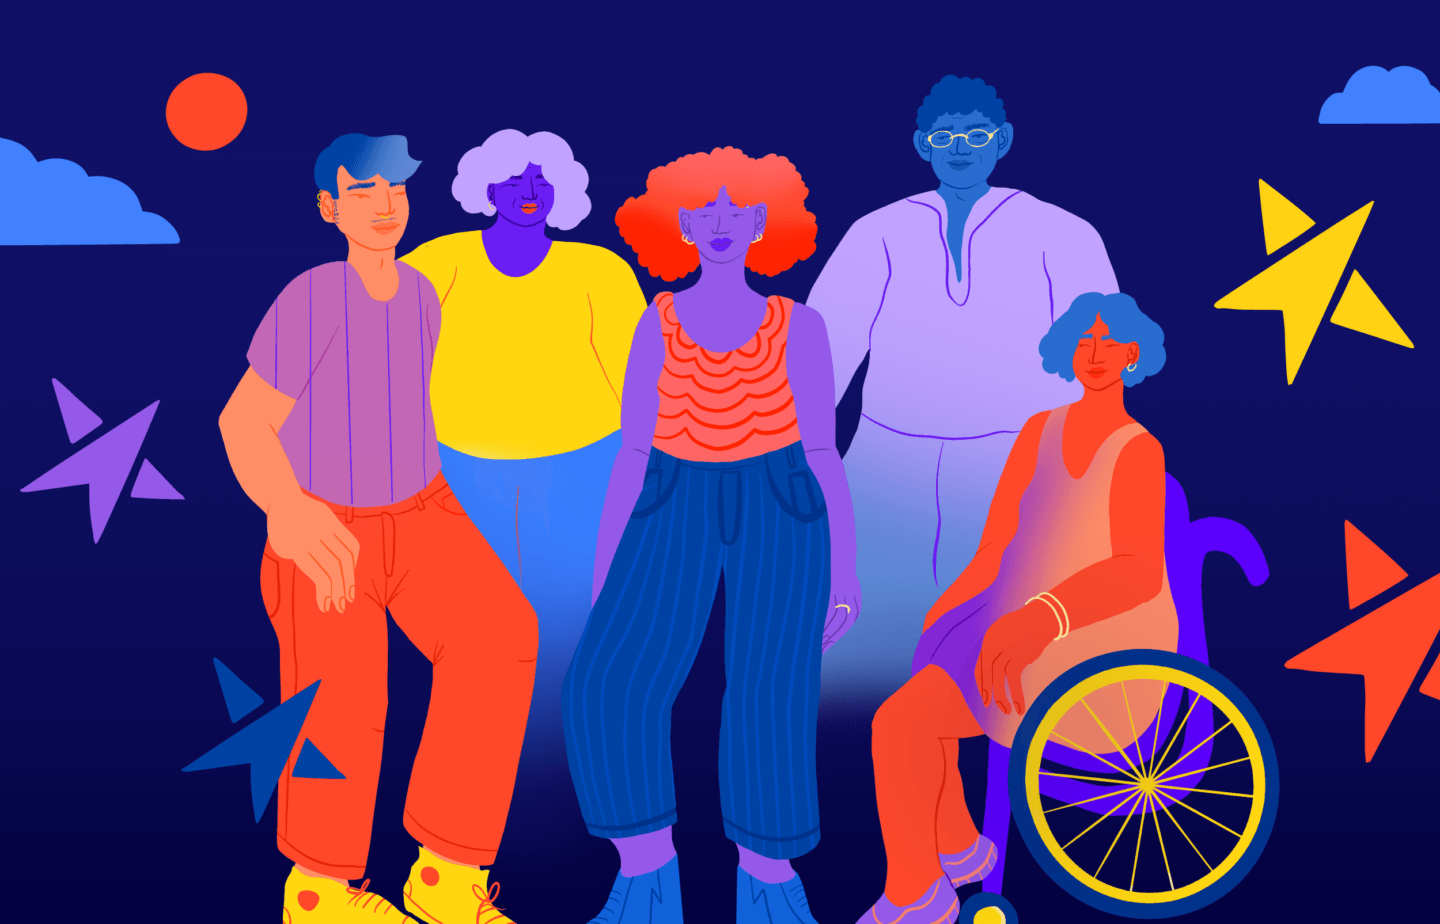 Animation of five diverse people. One of whom is in a wheelchair